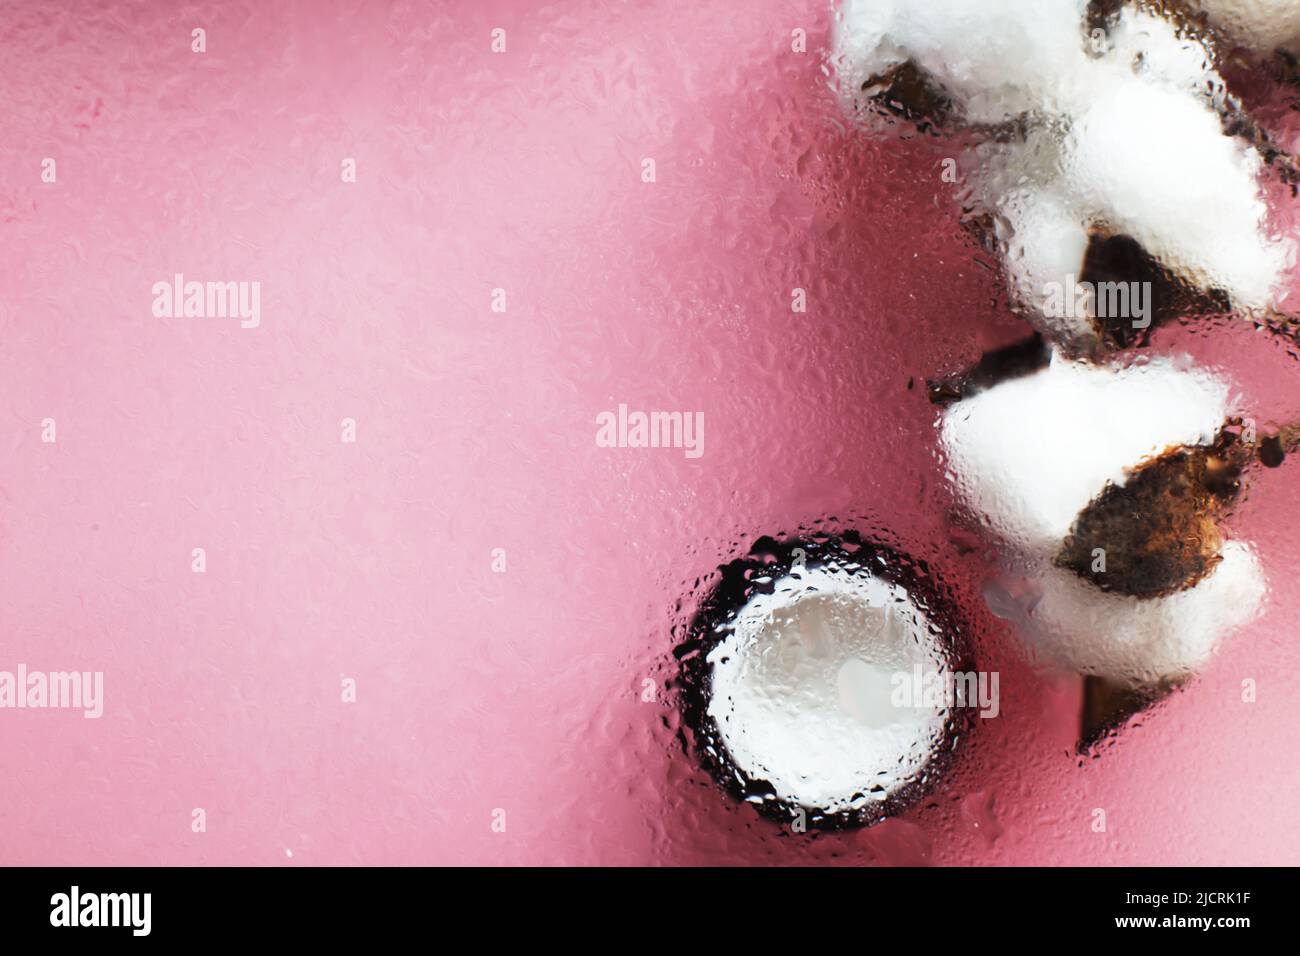 Concept of natural moisturizing skin care products. Face and hand cream under a glass surface with water on a pink background. Stock Photo